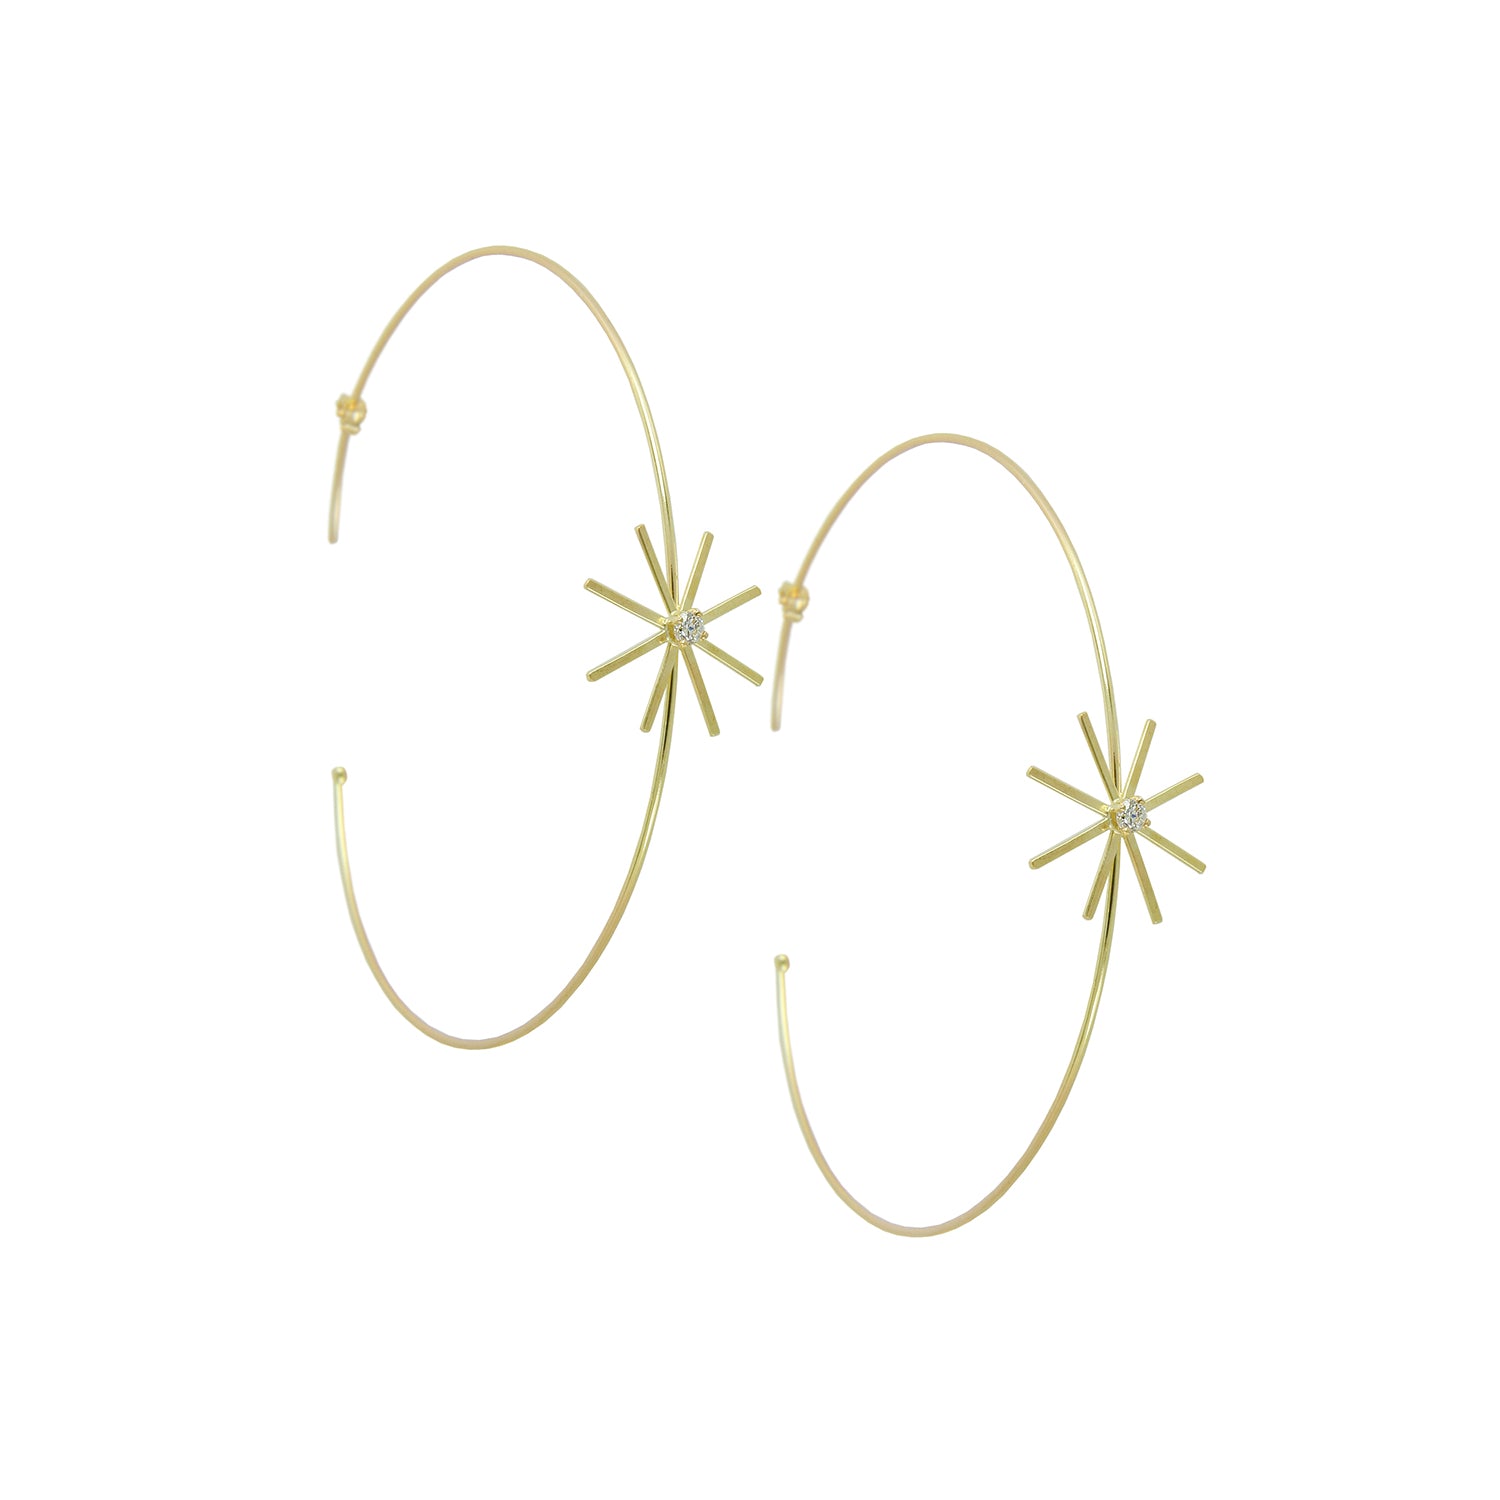 These 18ct yellow gold fine medium diamond hoop earrings are from our Pop Up Daisy Collection. The Flower motif is made up from fine gold petals and features a central Diamond set collet.